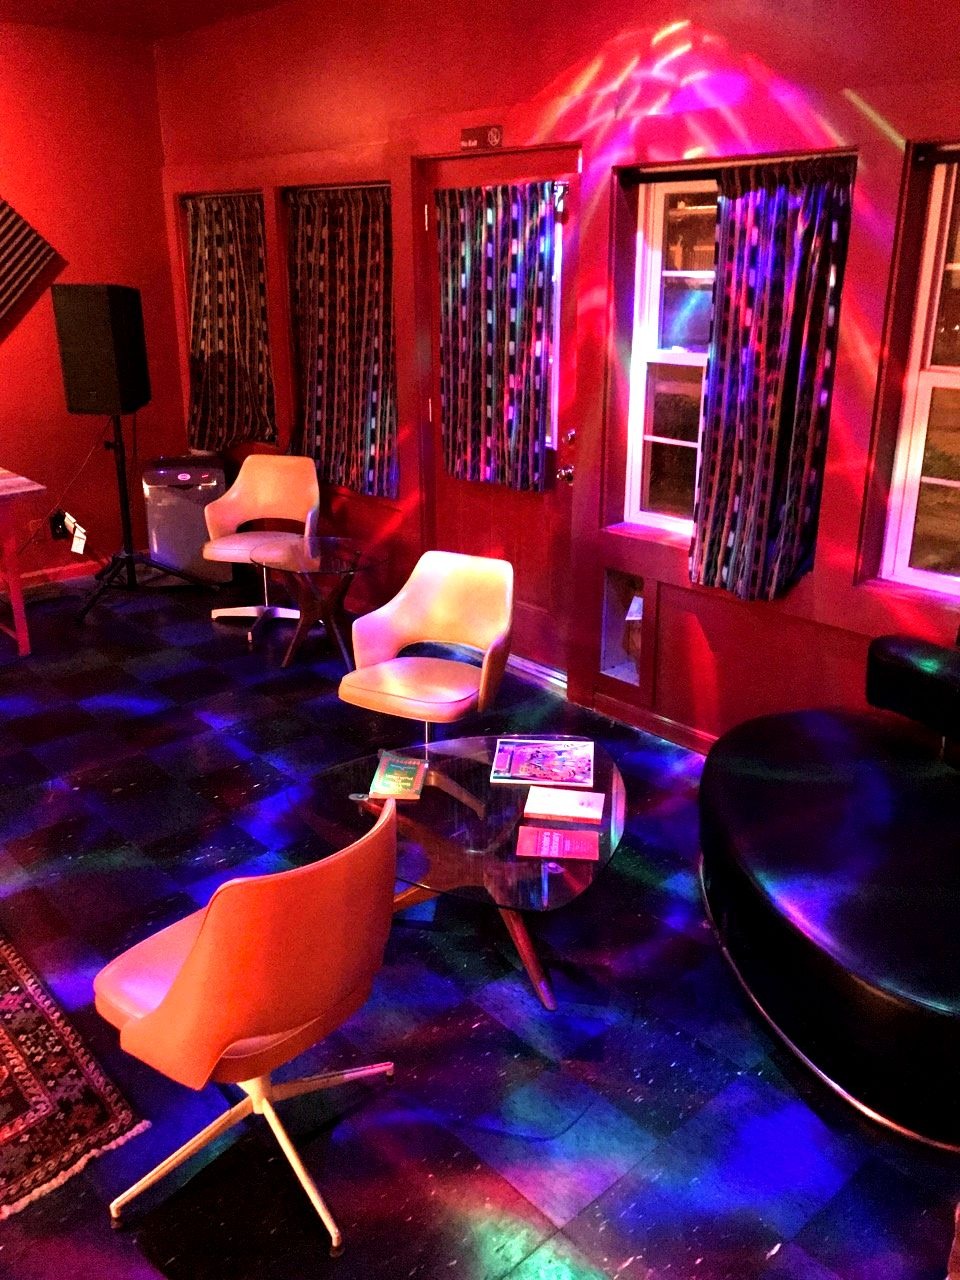 View of retro furniture and psychedelic, colorful lights inside The Oracle bar